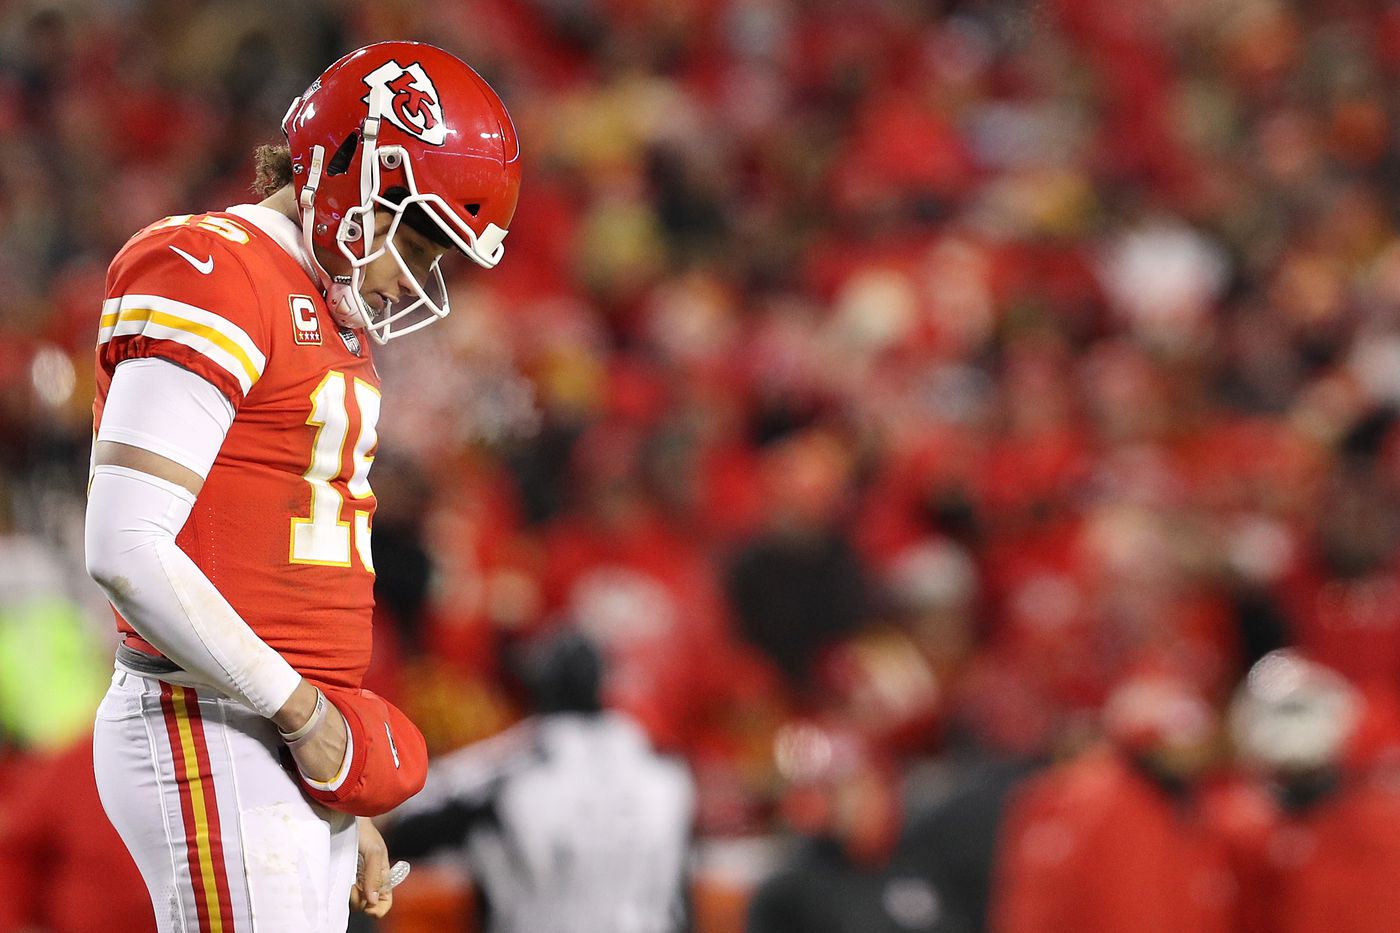 NFL changes playoff overtime rule after Kansas City Chiefs vs